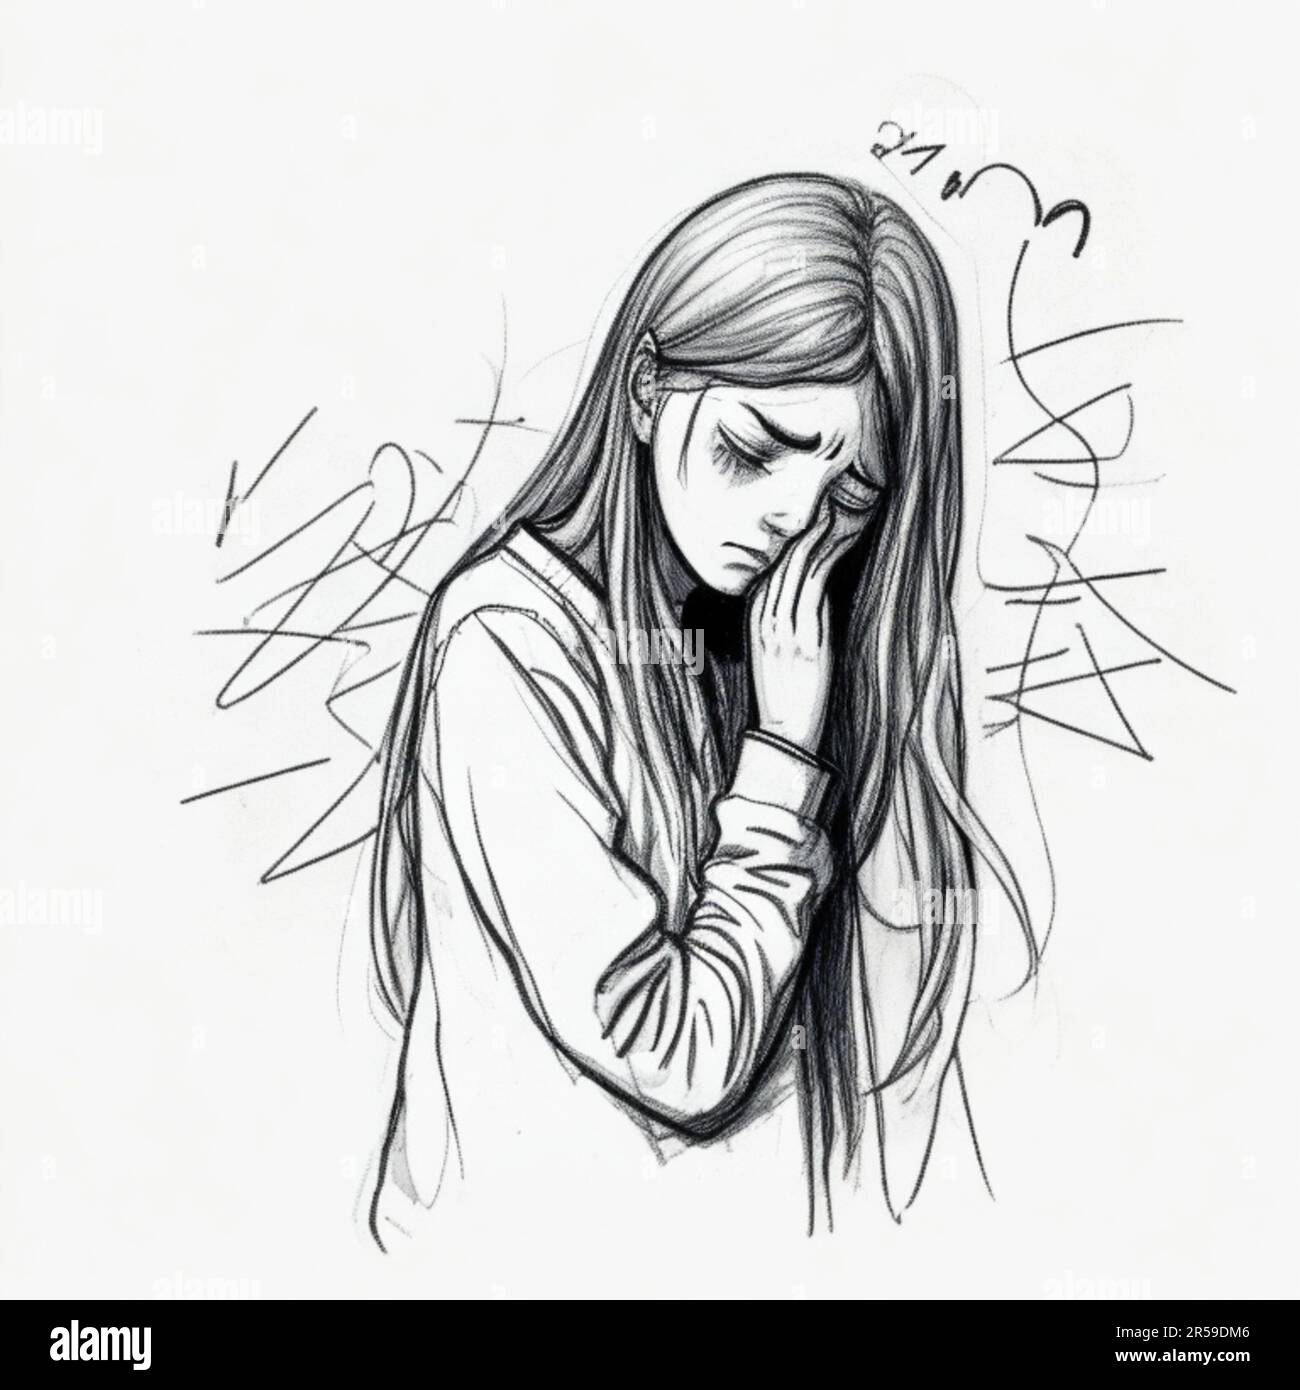 Sketch Lonely Girl Stock Illustrations  565 Sketch Lonely Girl Stock  Illustrations Vectors  Clipart  Dreamstime